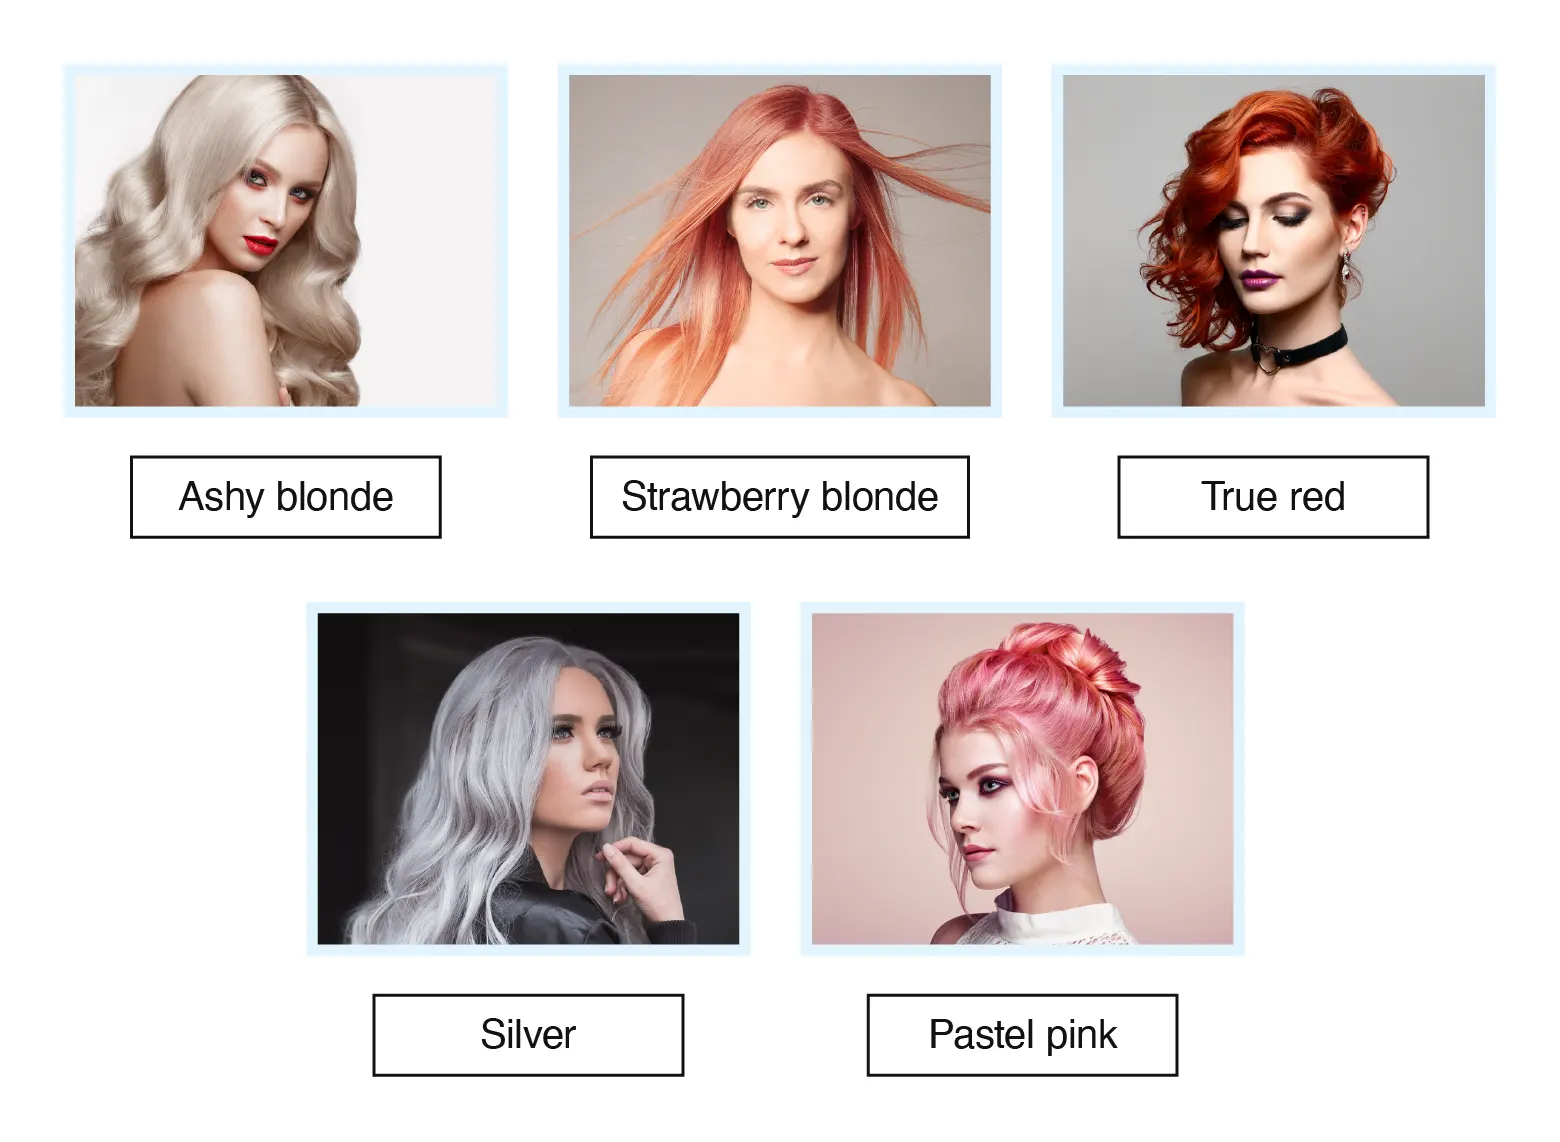 50 Shades Of Red – Select The Best Red Hair Color - Astound Magazine